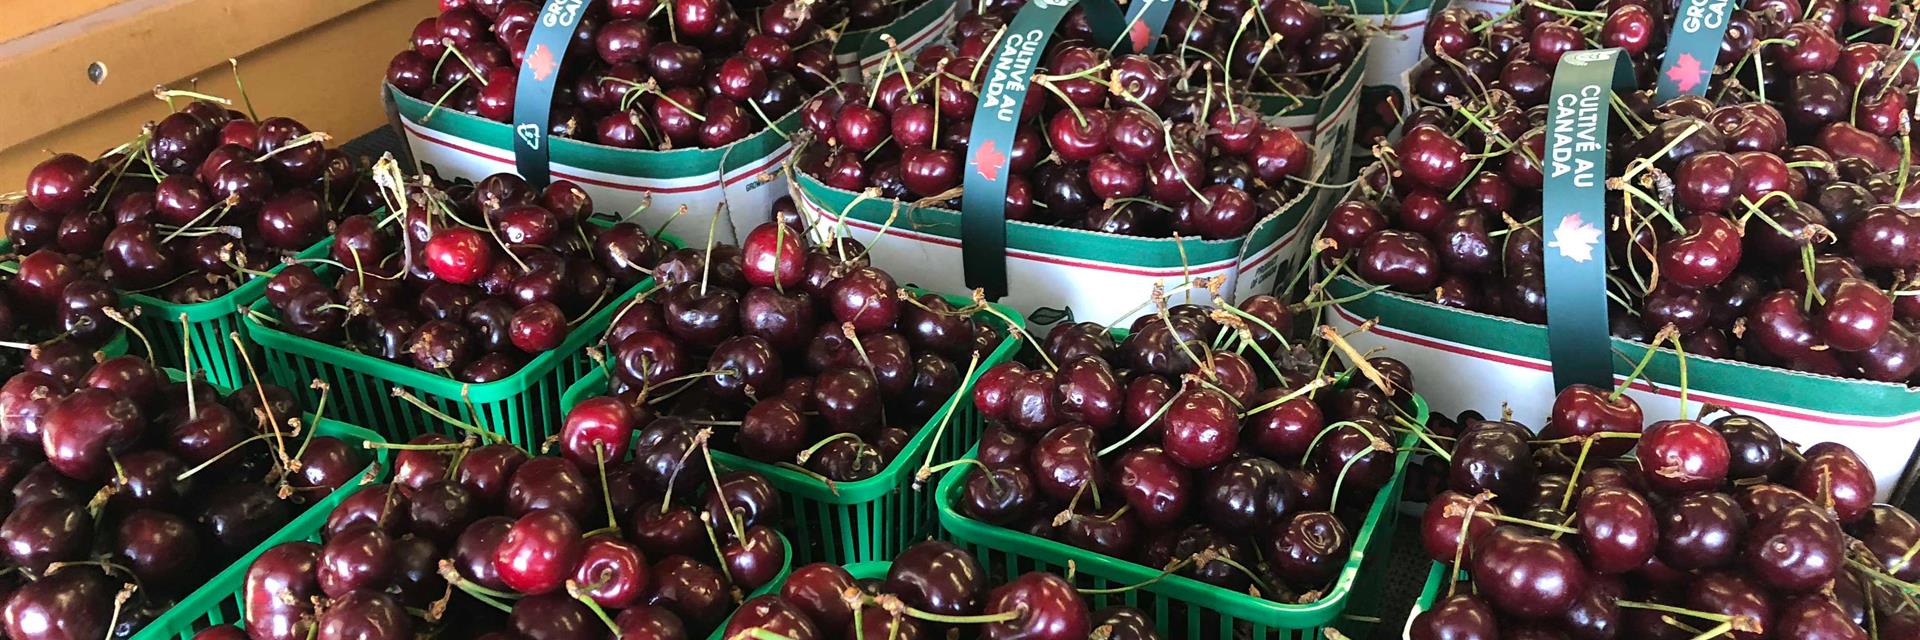 box of cherries from an orchard in blenheim 